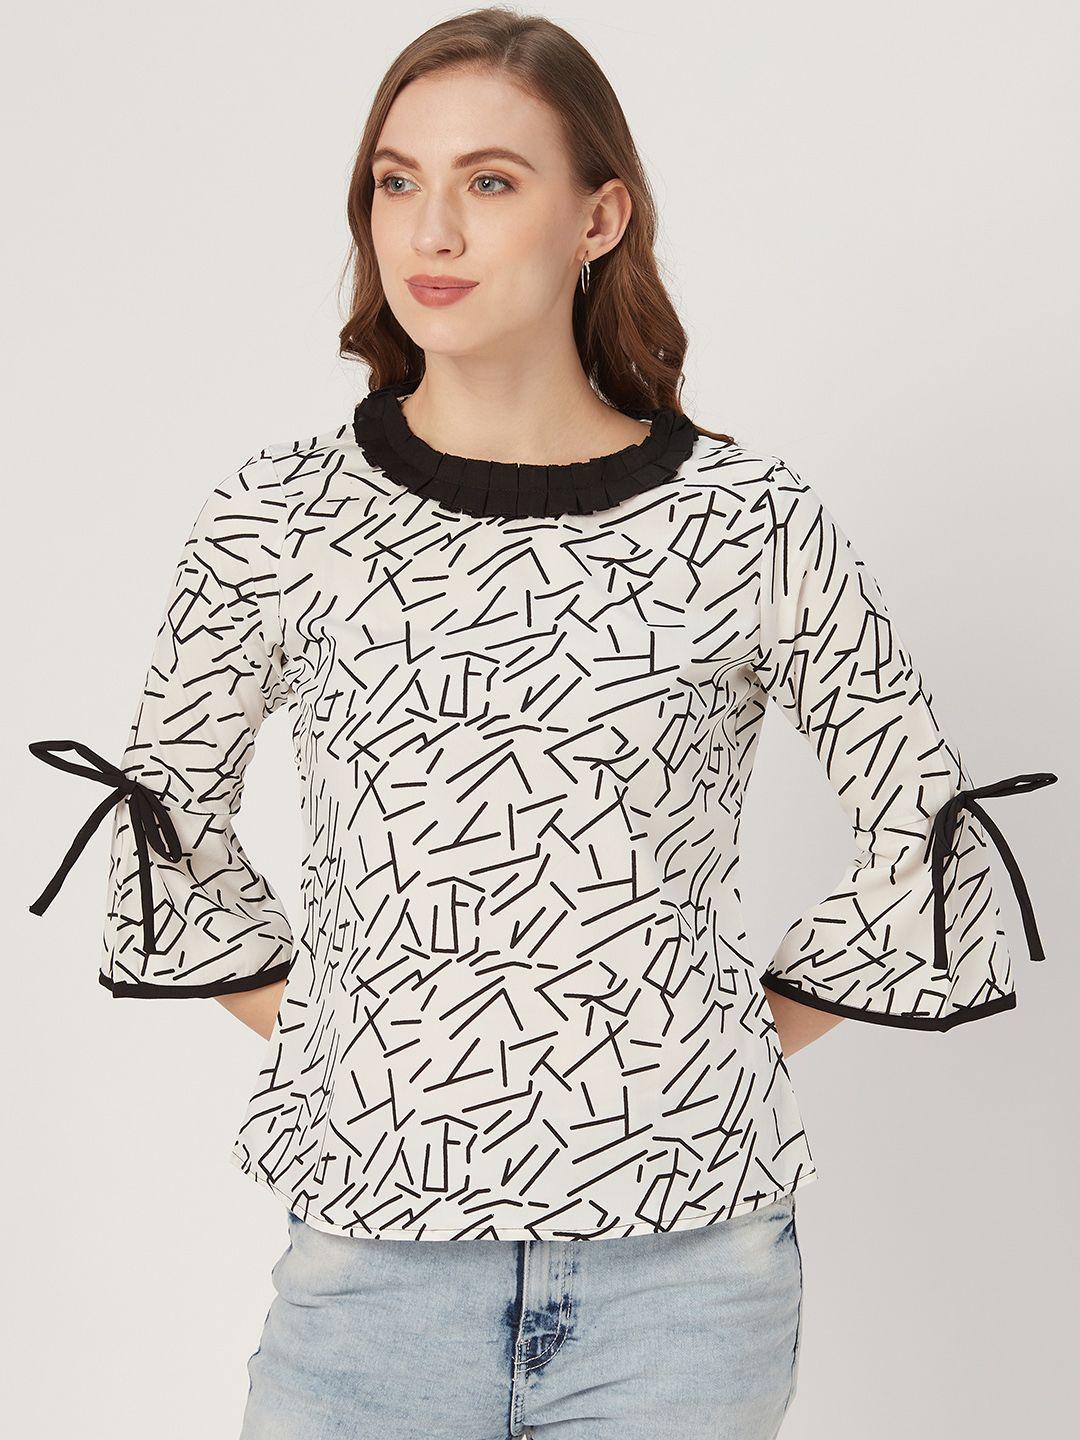 style-quotient-women-white-and-black-abstract-print-top